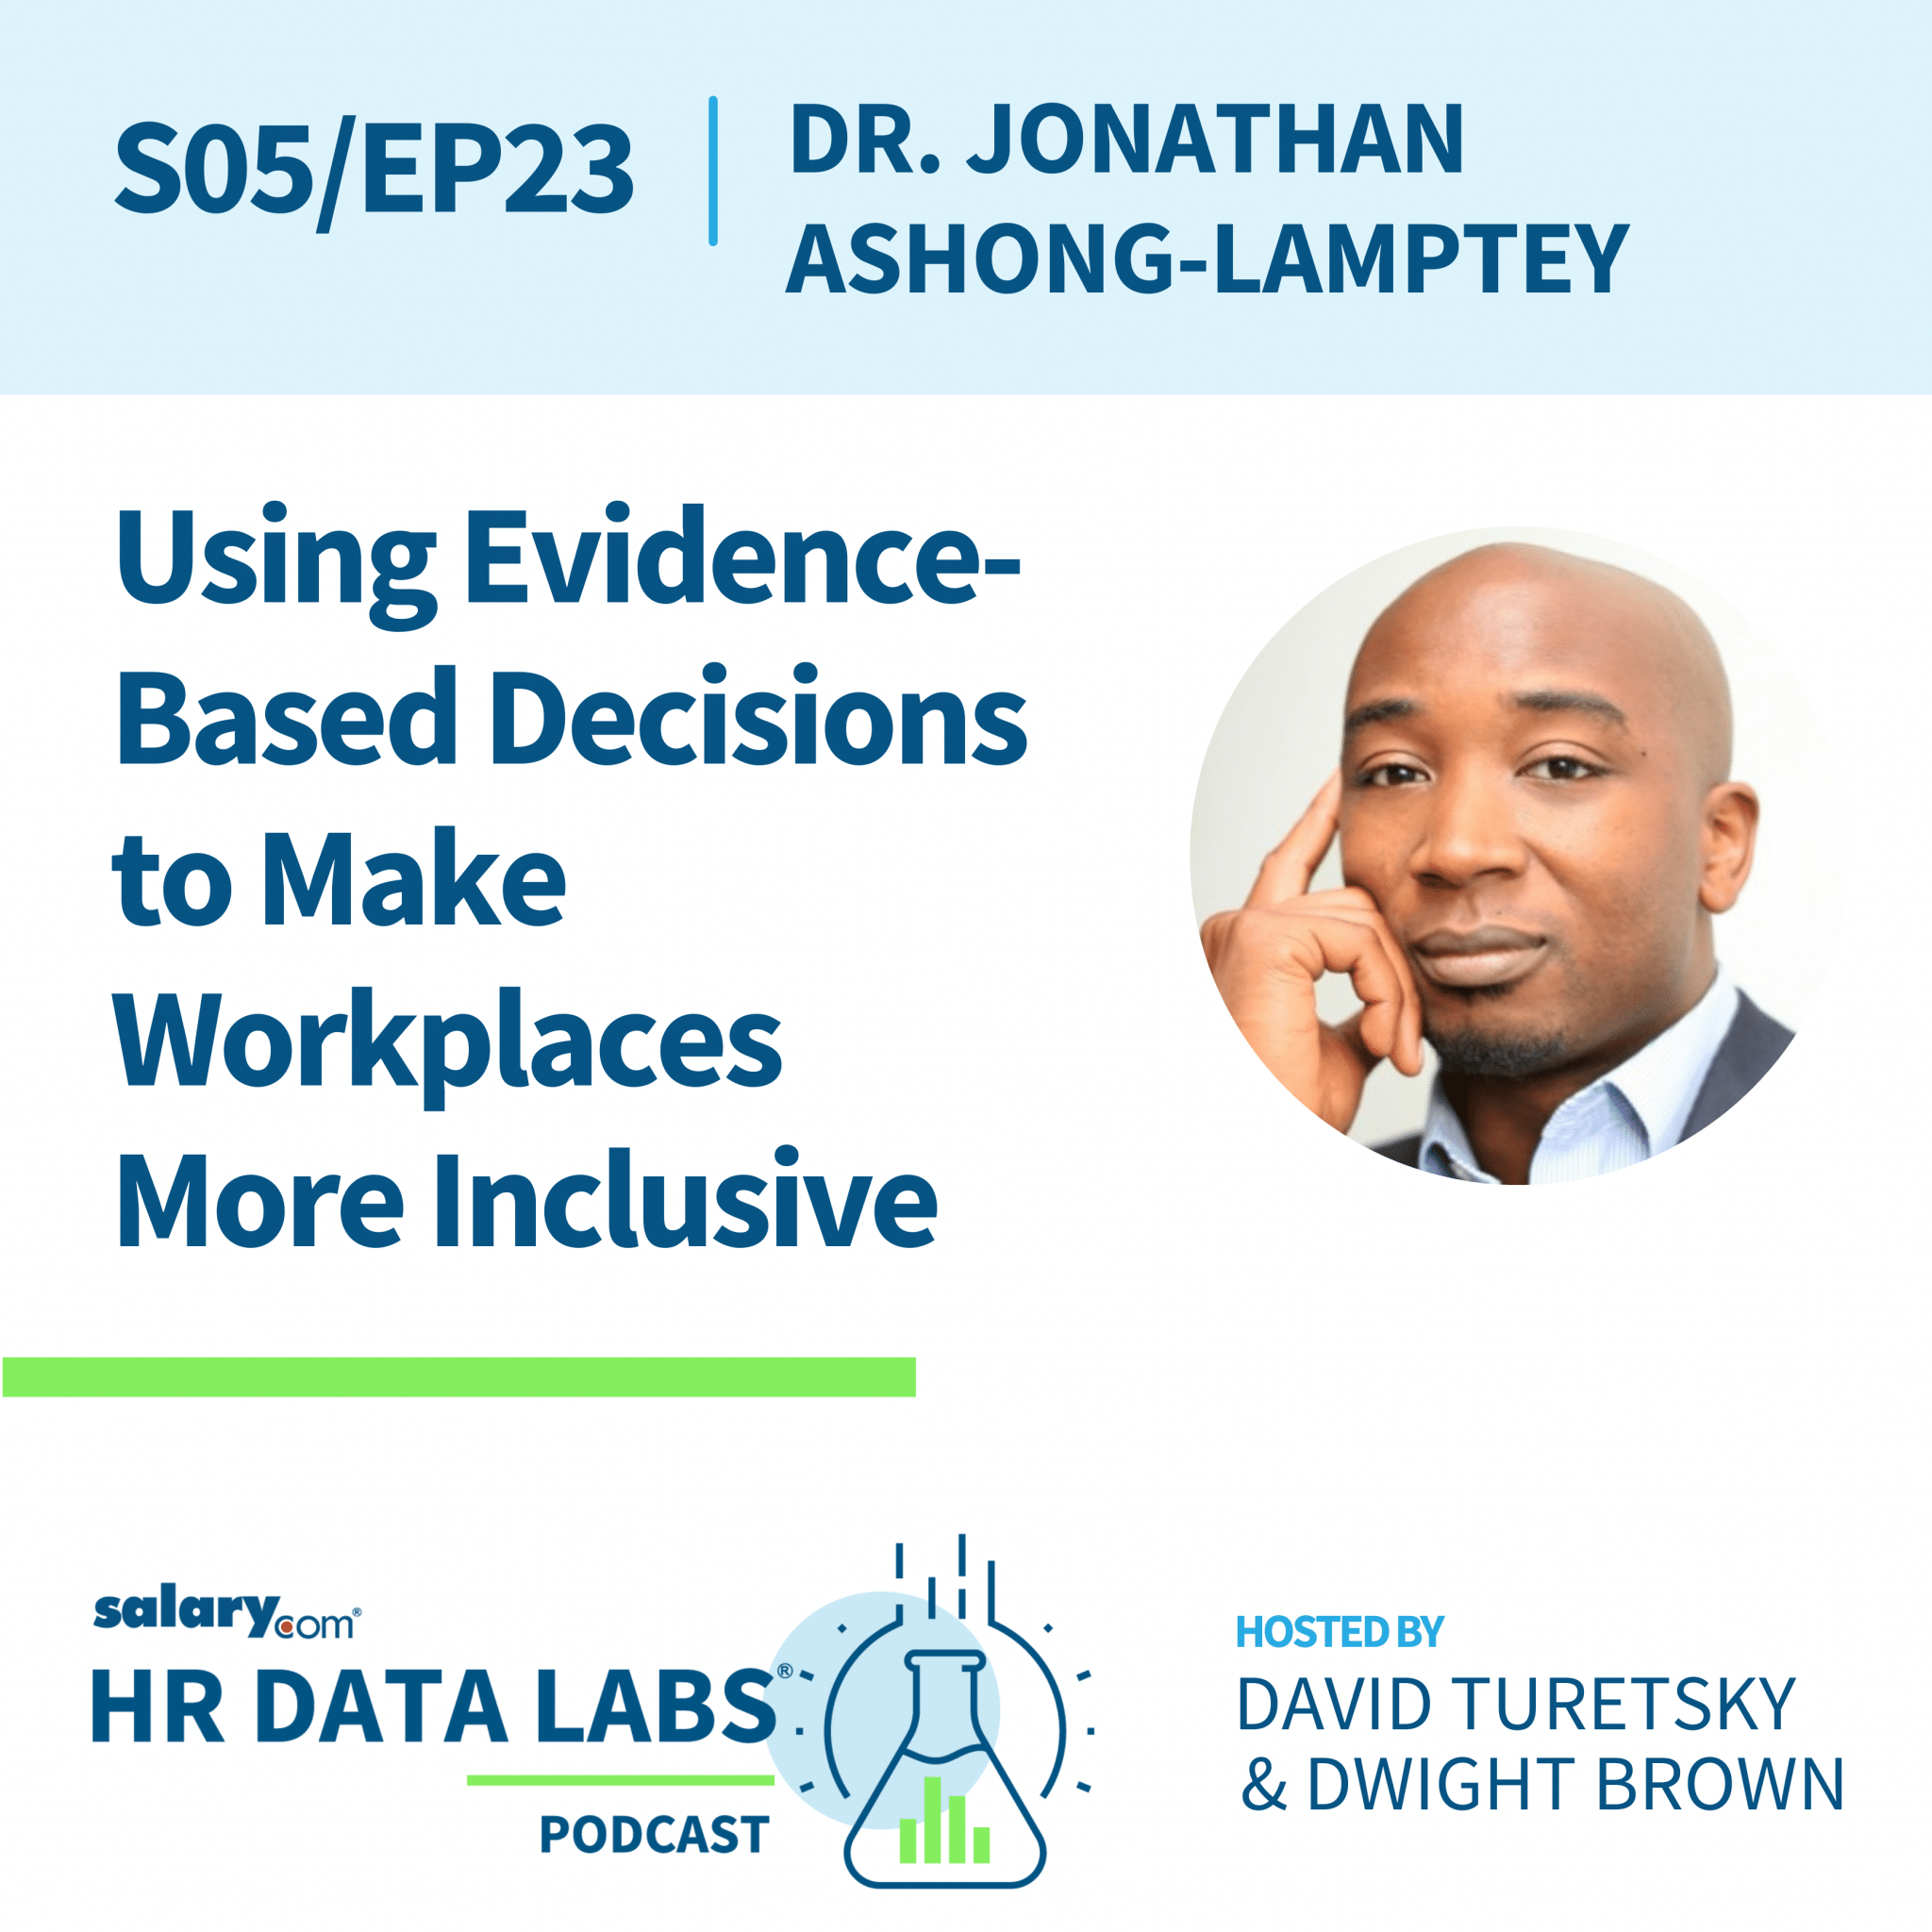 Dr. Jonathan Ashong-Lamptey – Using Evidence-Based Decisions to Make Workplaces More Inclusive